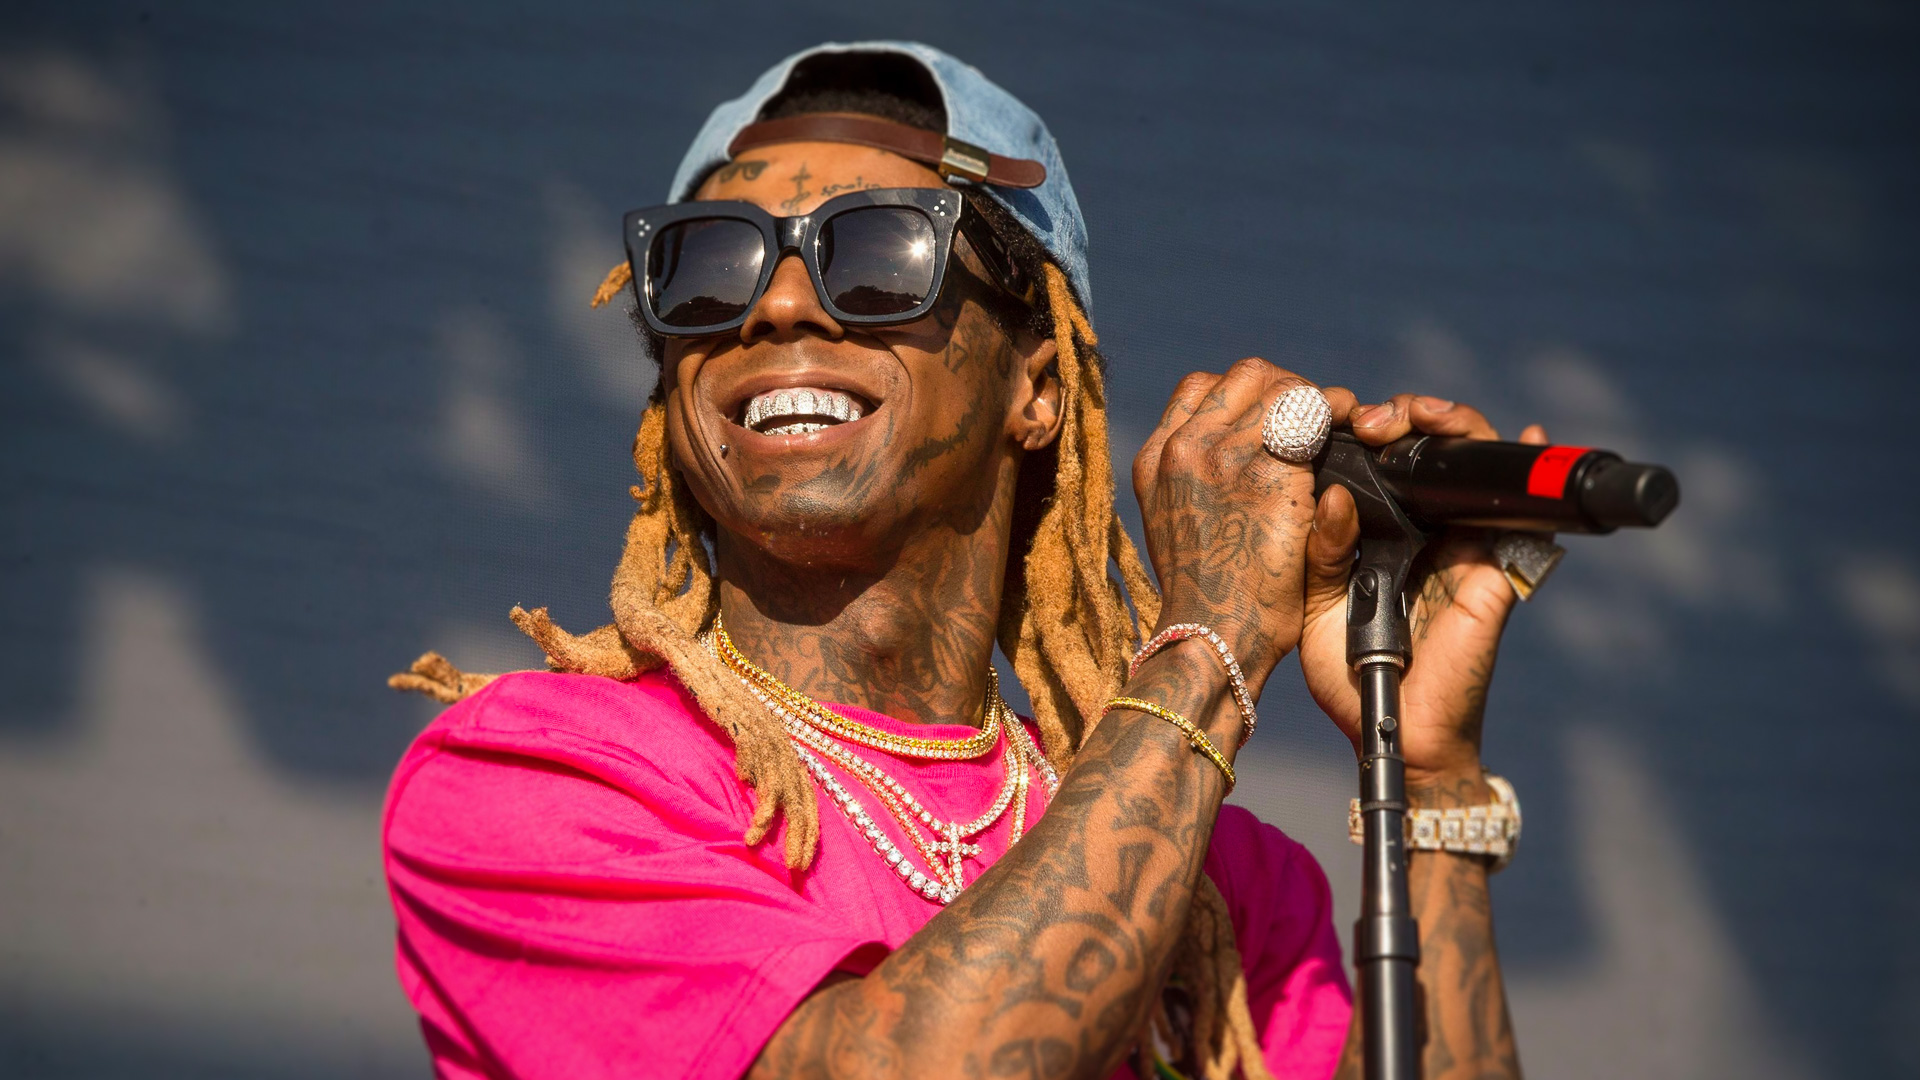 Lil’ Wayne Dropping “Funeral” Album By End of Year!!!